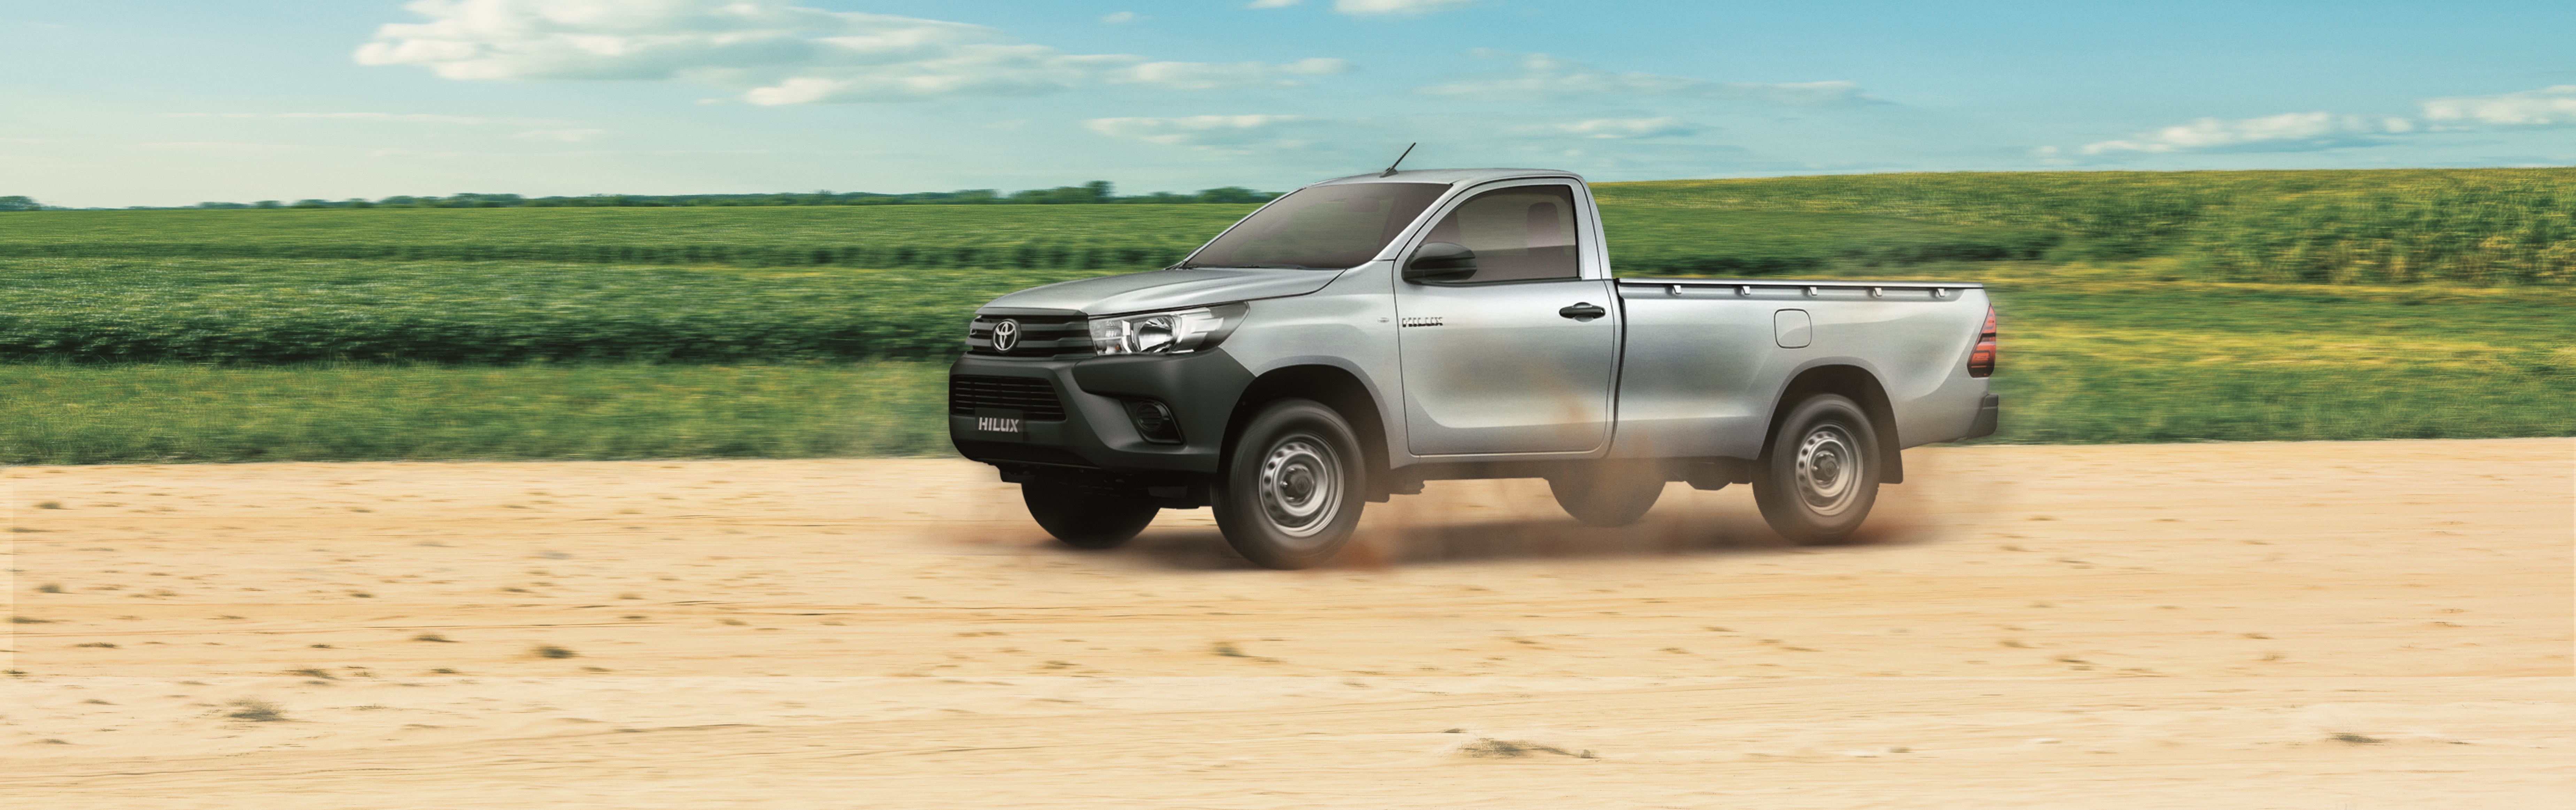 Hilux Cabine Simples